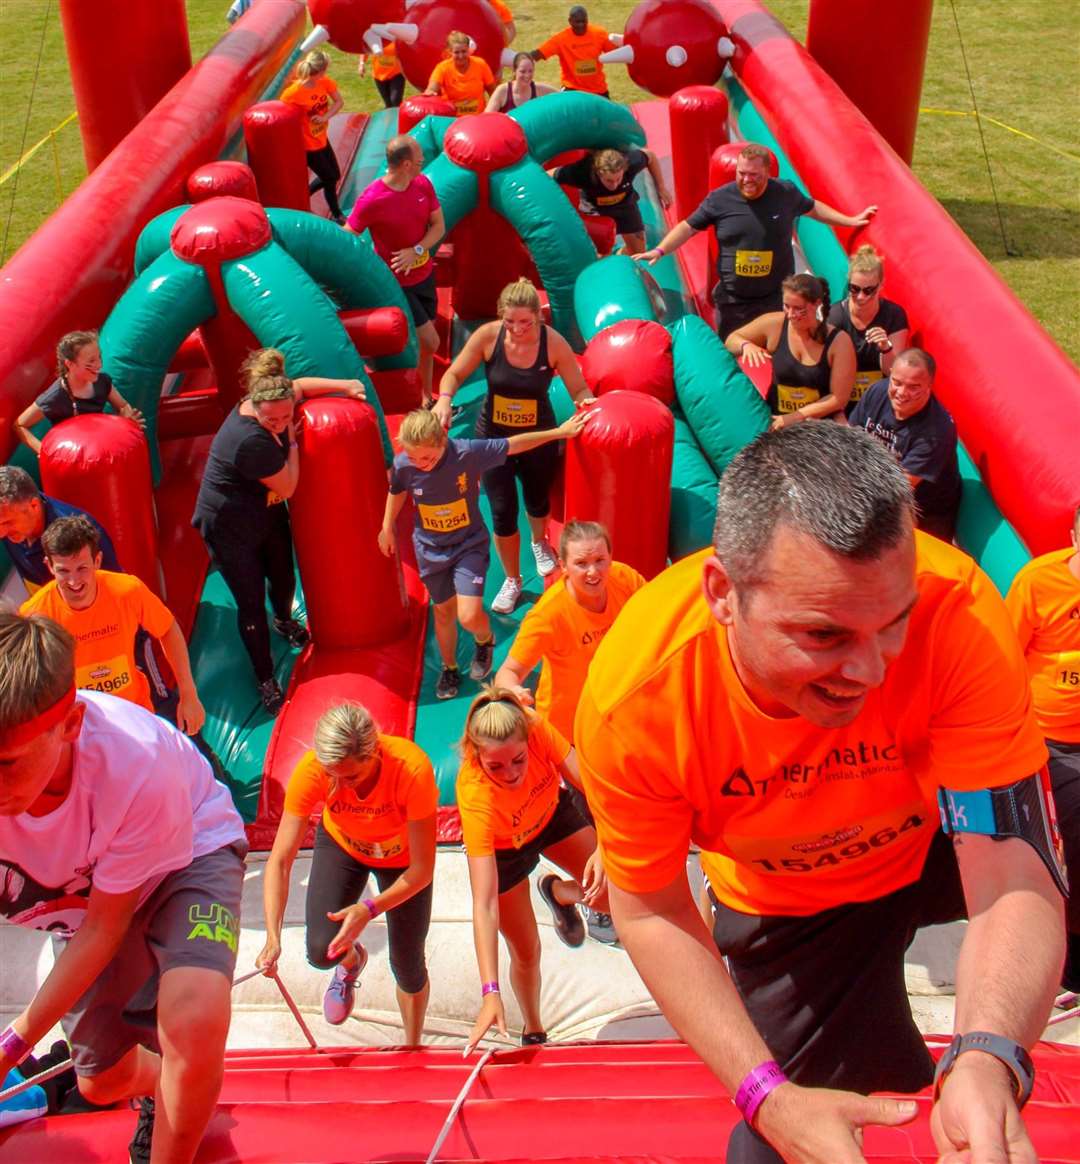 The Gung Ho! obstacle course has been inspired by TV shows like Total Wipeout